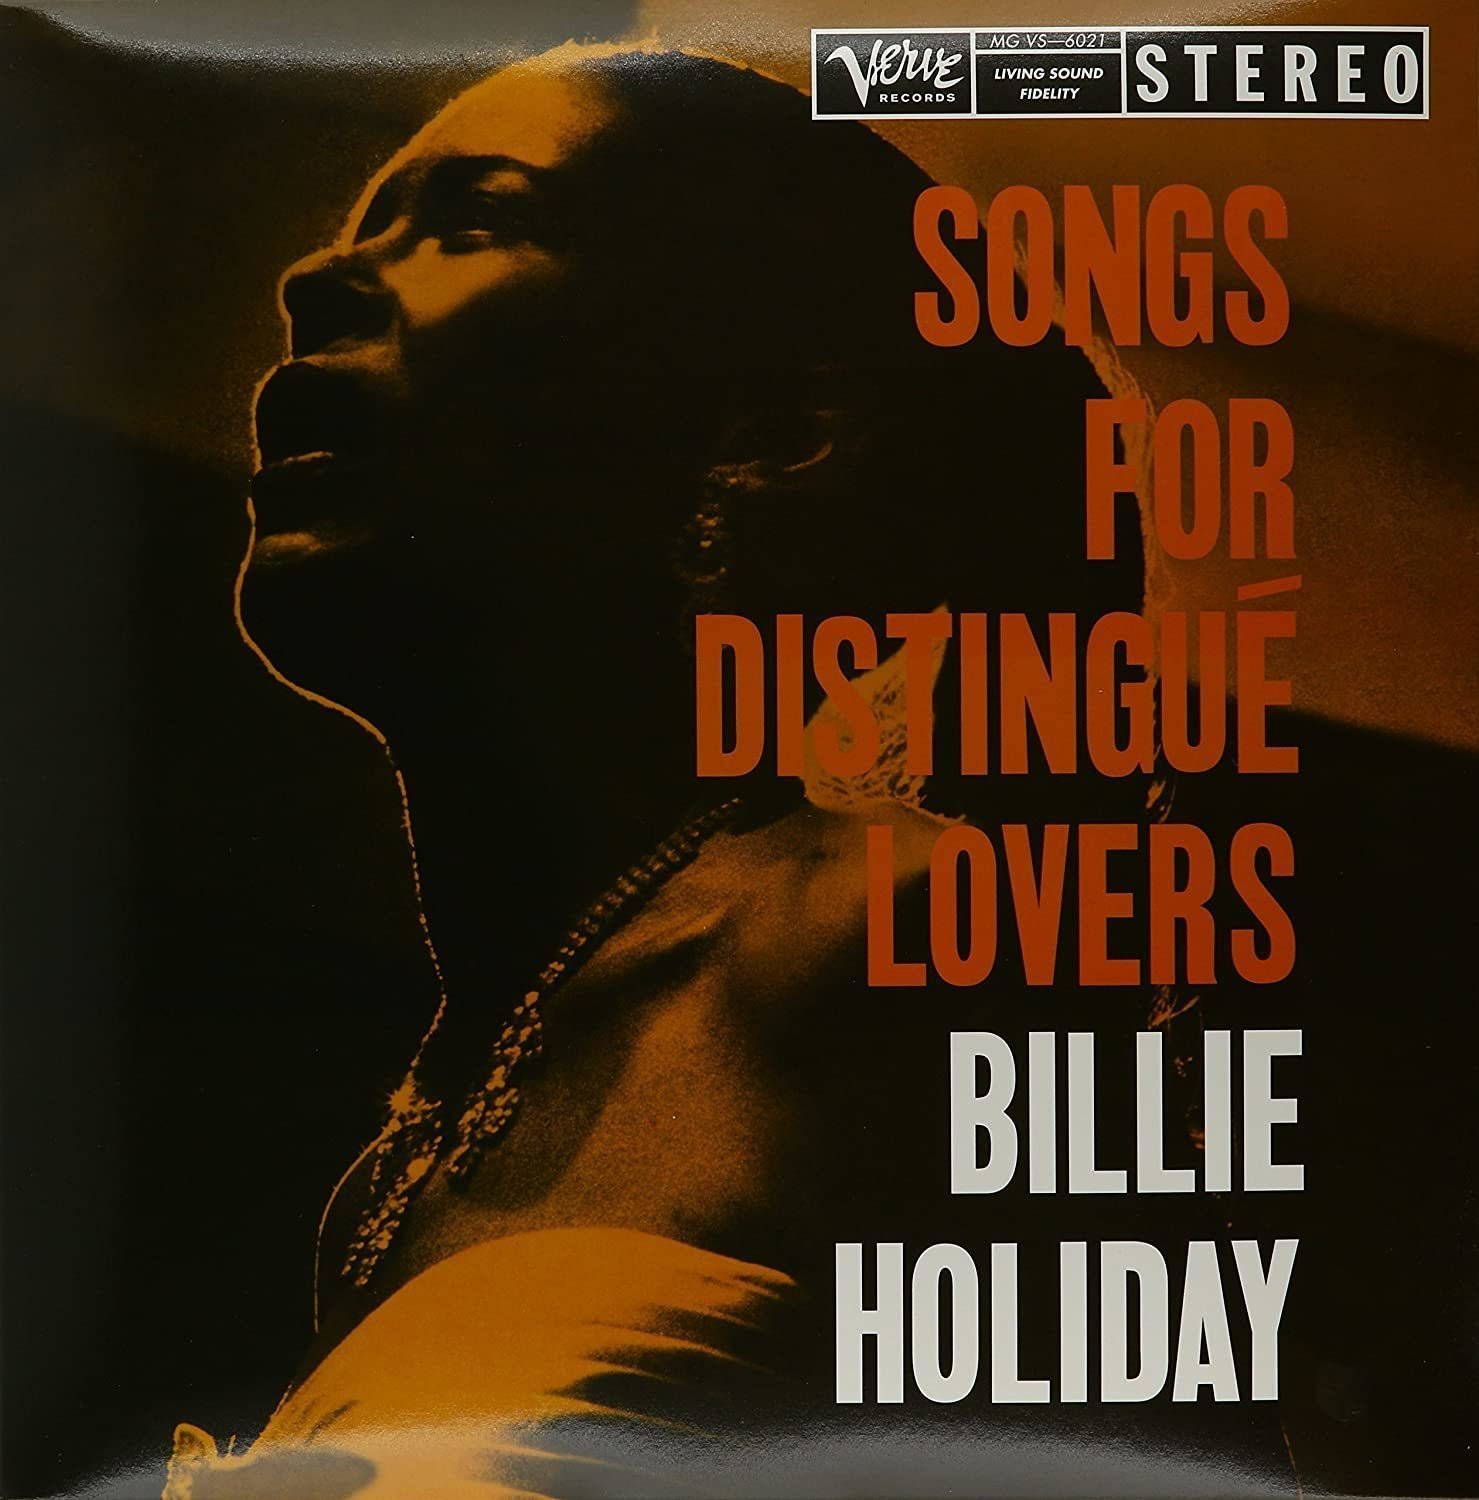 Billie Holiday - Songs For Distingue Lovers (2 LP) Billie Holiday